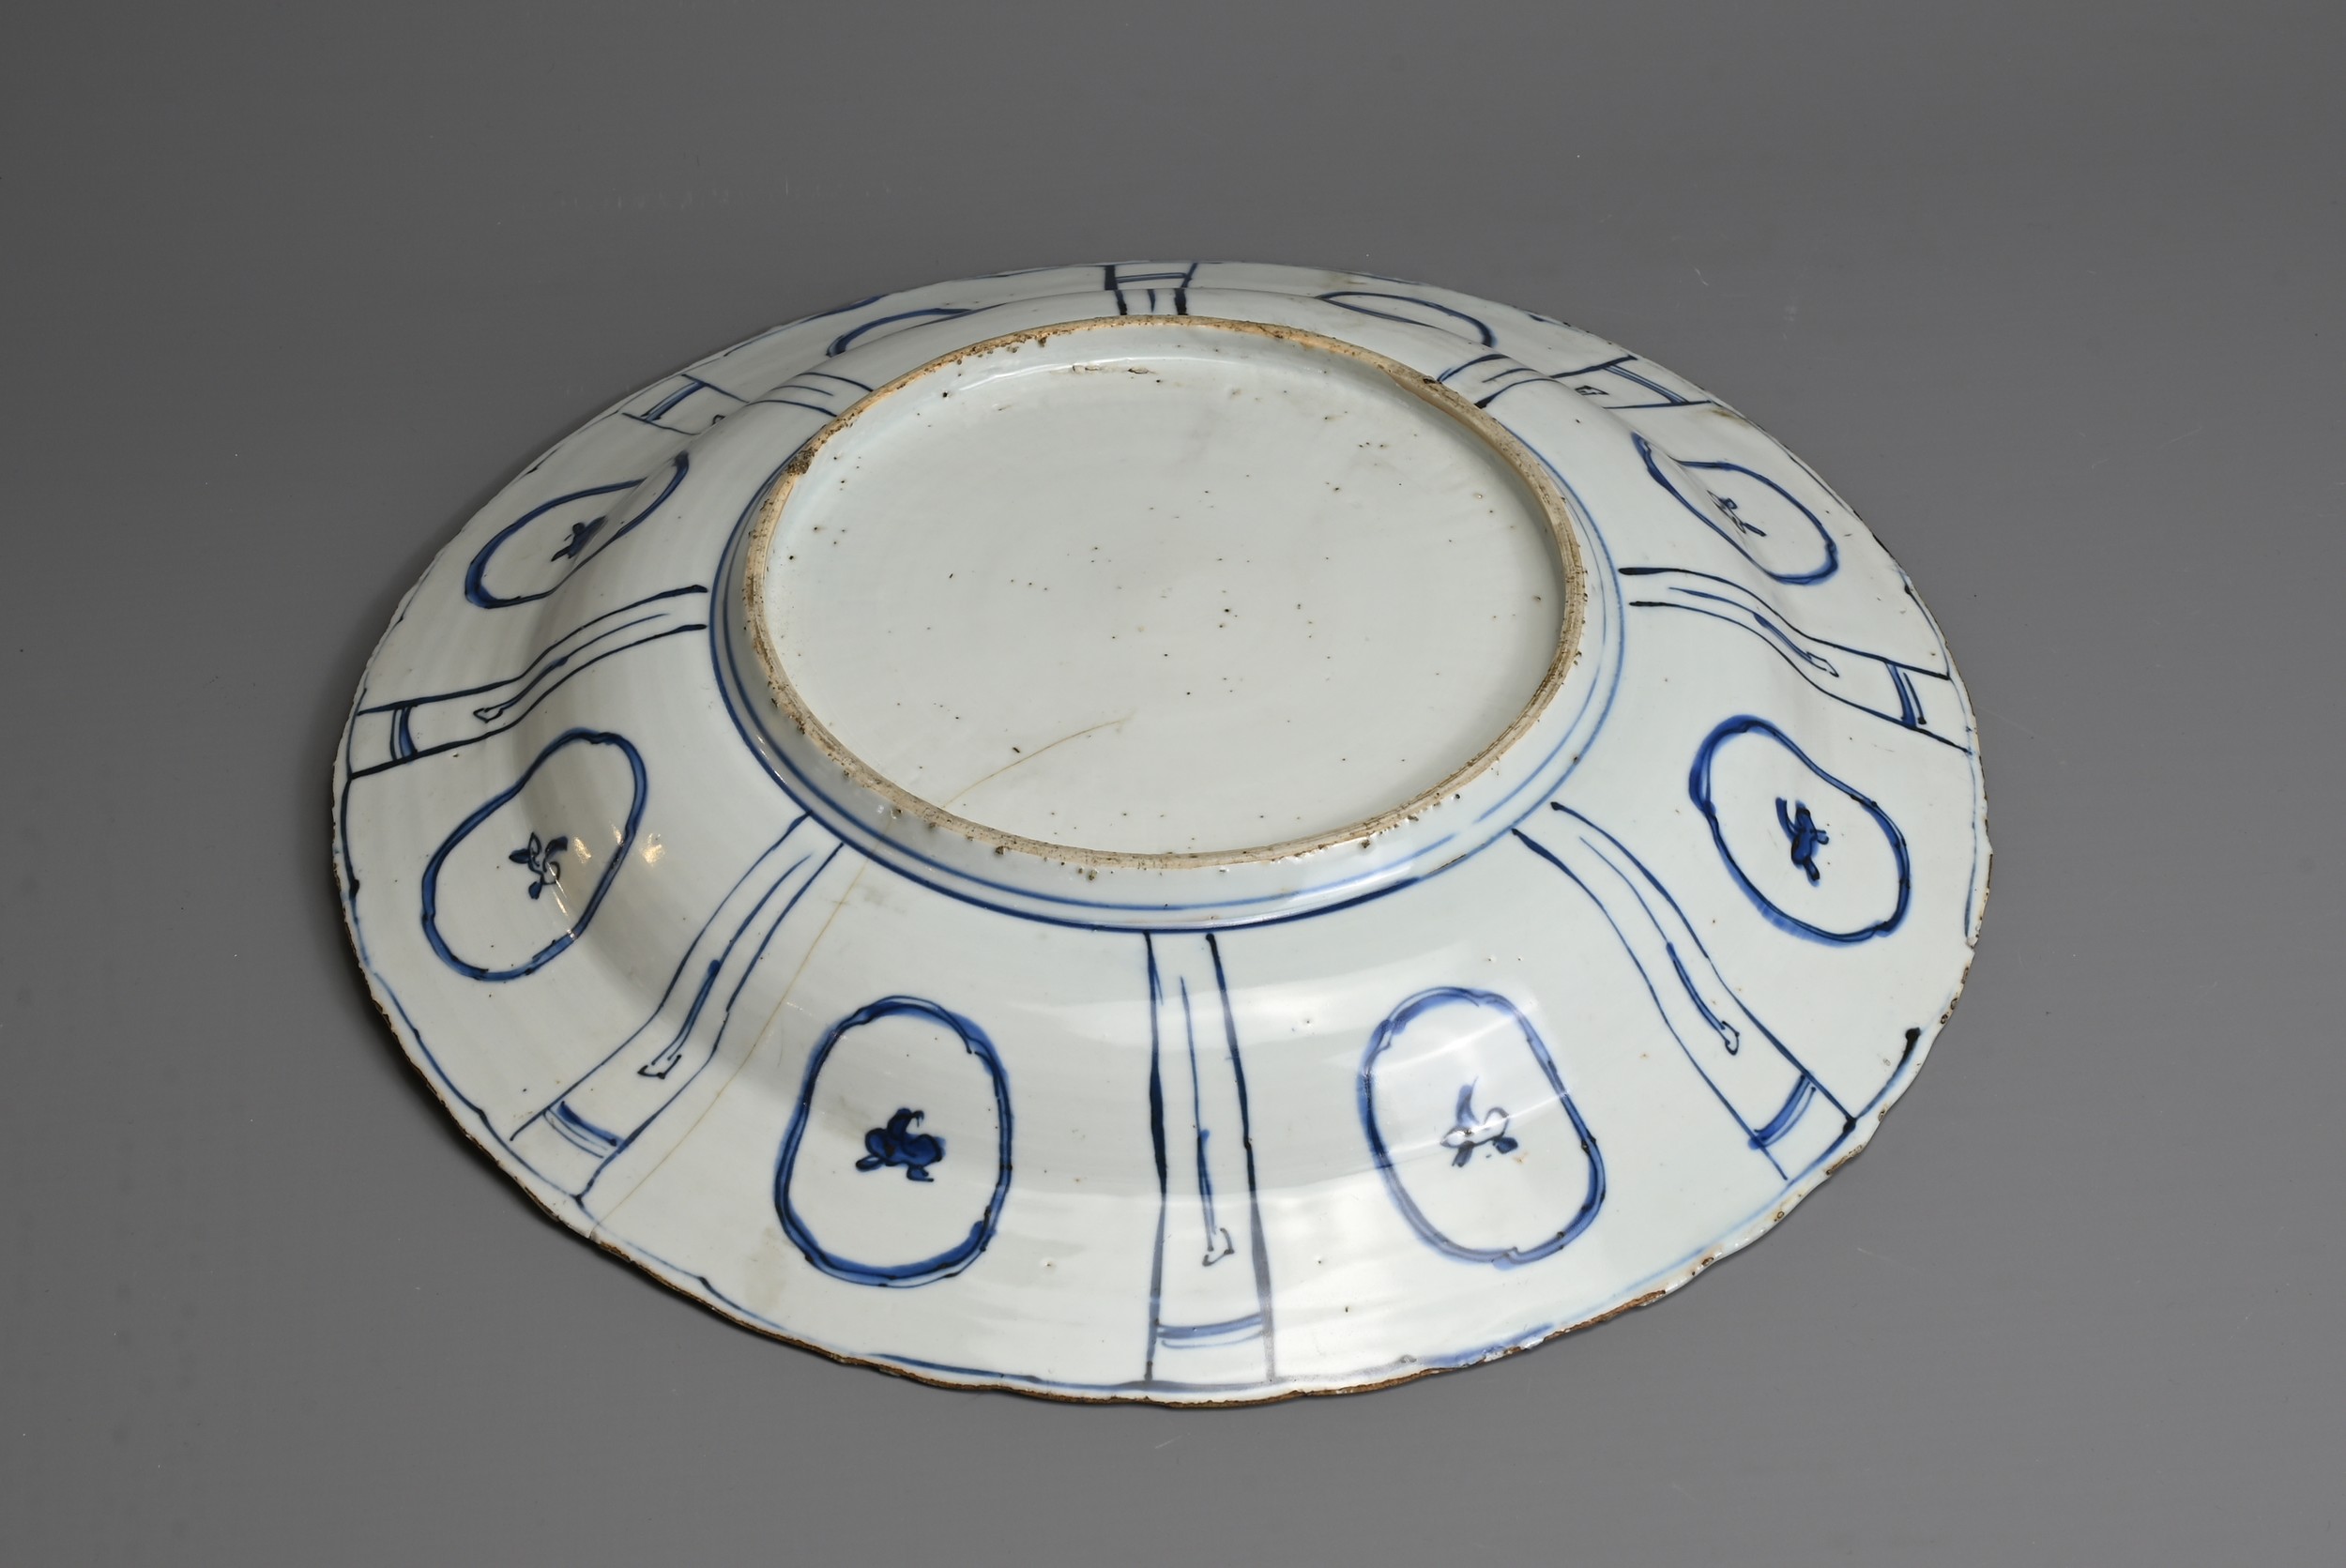 A CHINESE BLUE AND WHITE PORCELAIN KRAAK DISH, MING DYNASTY. Decorated with ducks at a lotus pond - Image 5 of 6